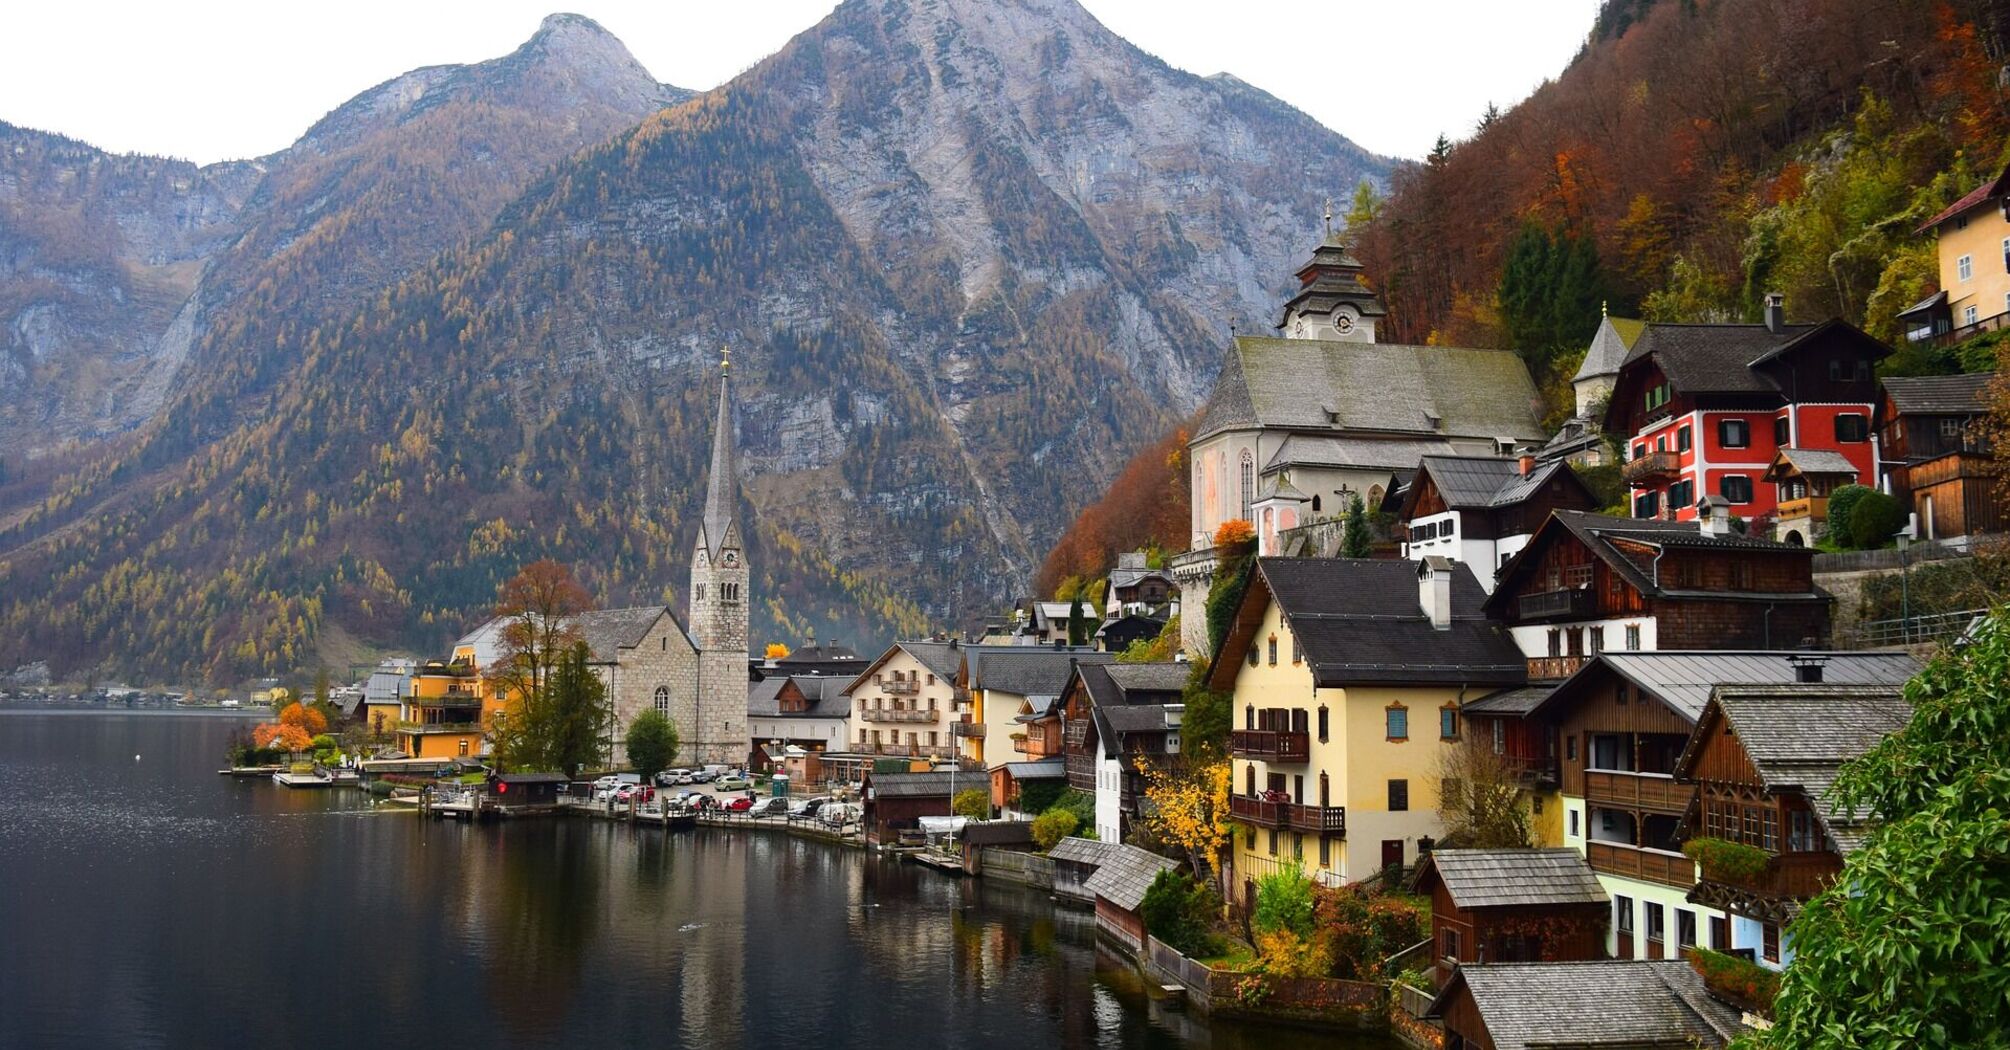 Scenic view of a lakeside village with traditional European architecture and mountainous background